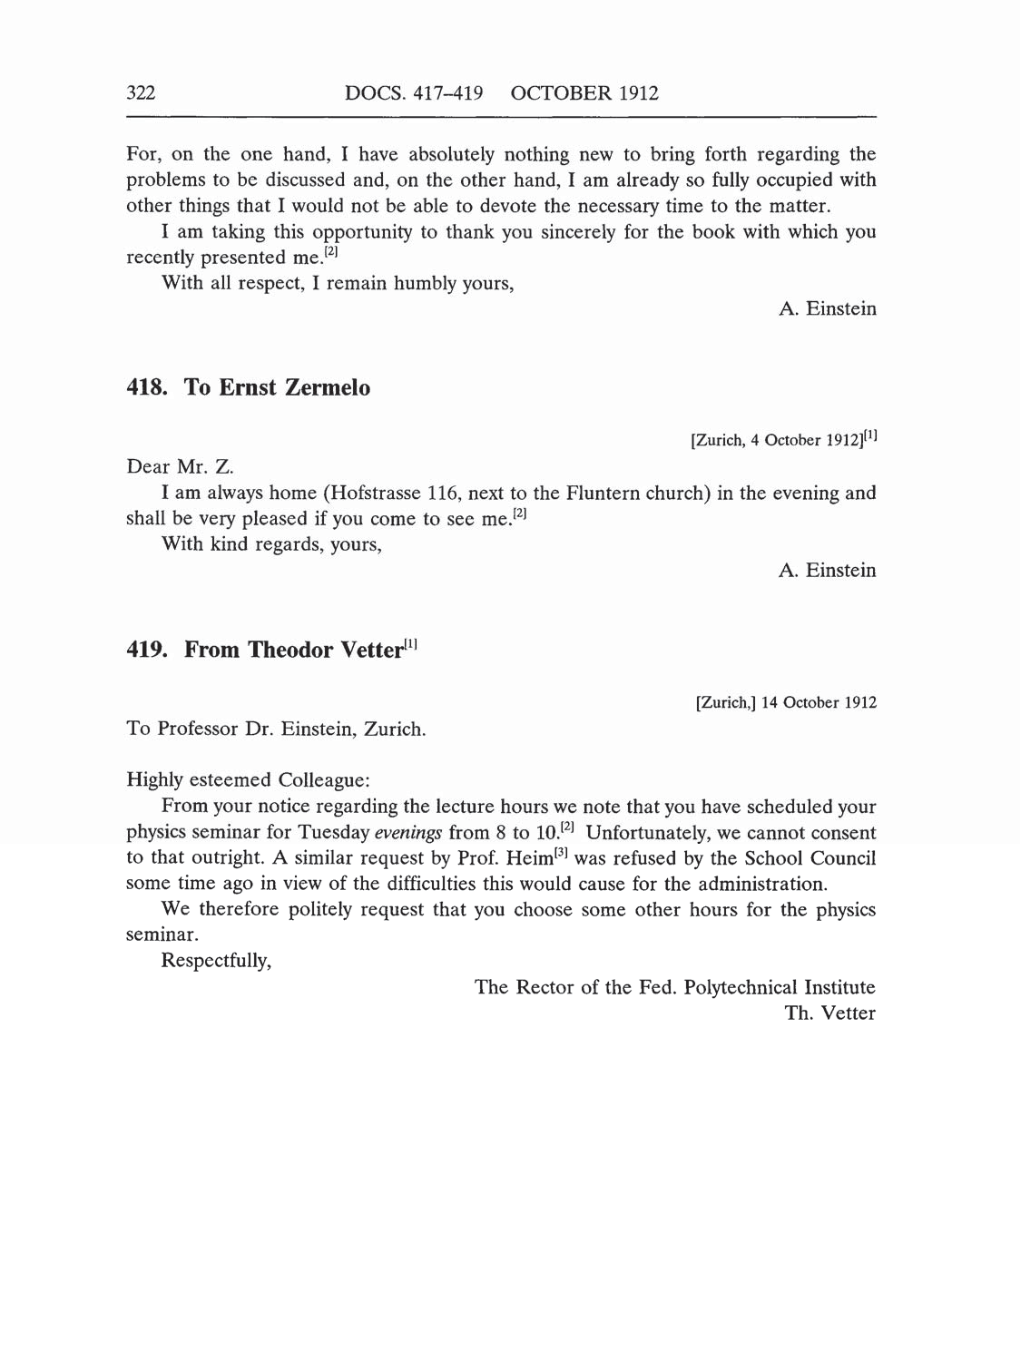 Volume 5: The Swiss Years: Correspondence, 1902-1914 (English translation supplement) page 322